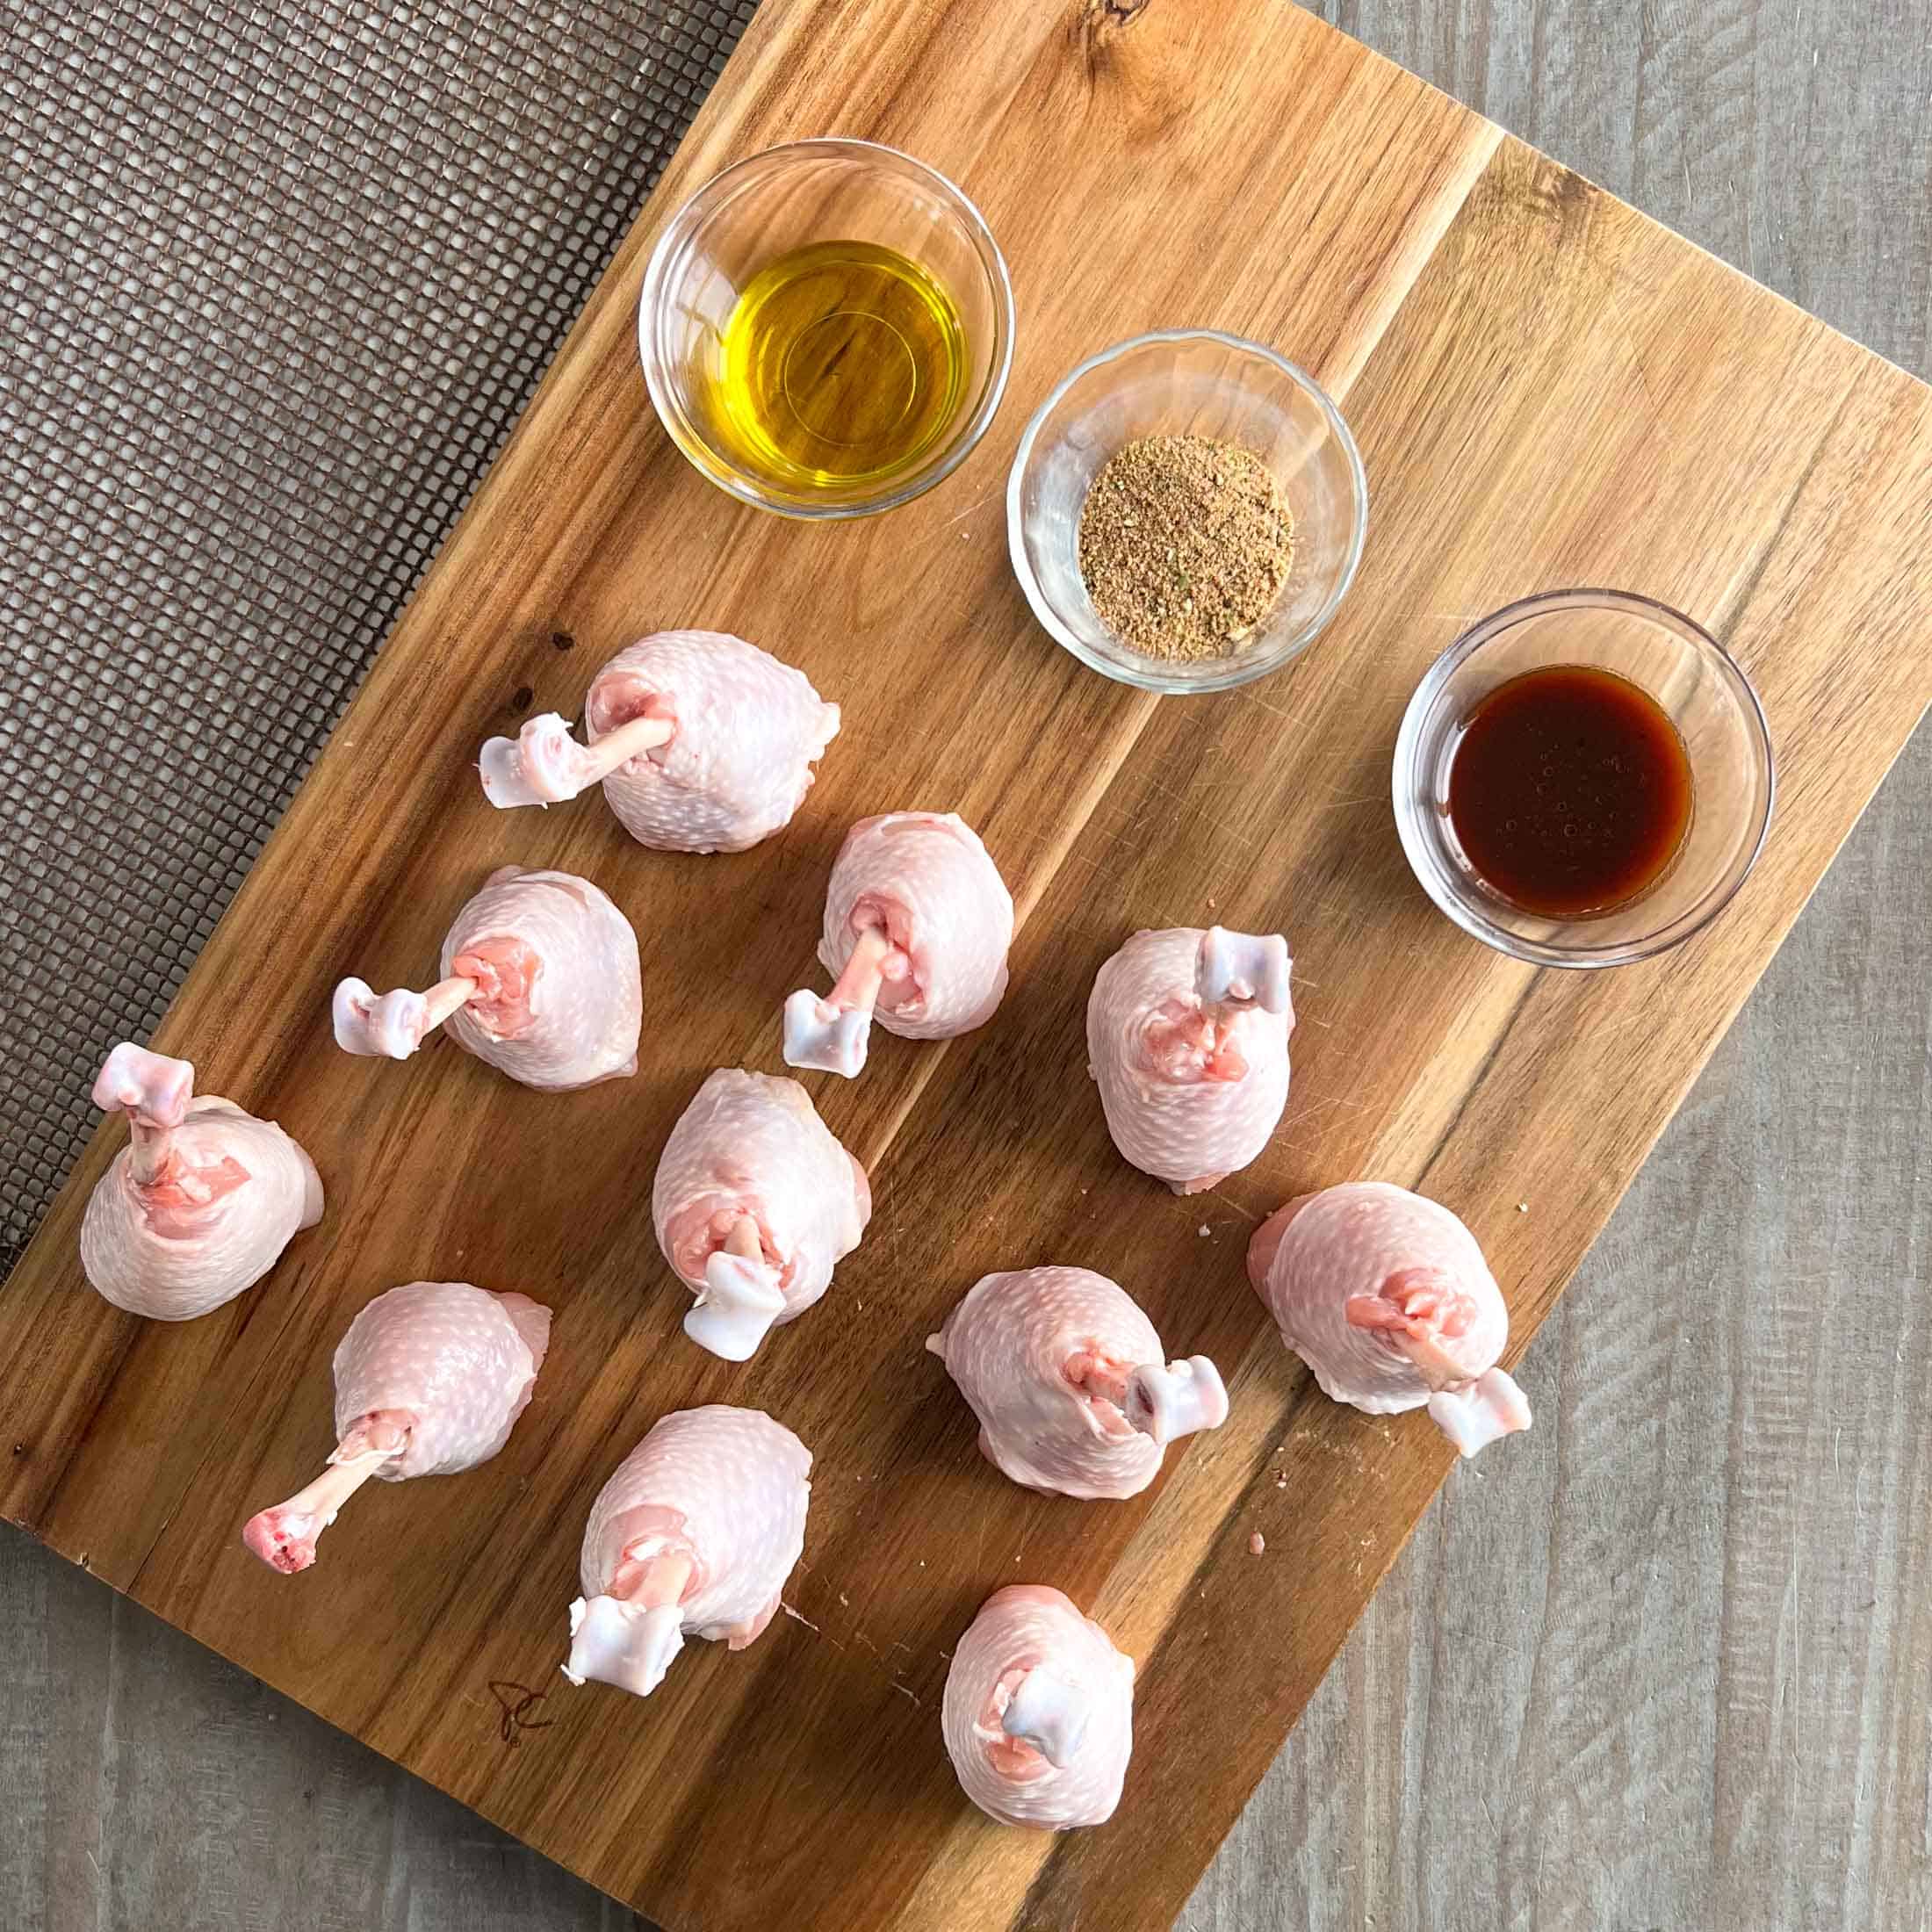 Eleven frenched drumsticks ready to be seasoned with olive oil, rub, and barbecue sauce in bowls.